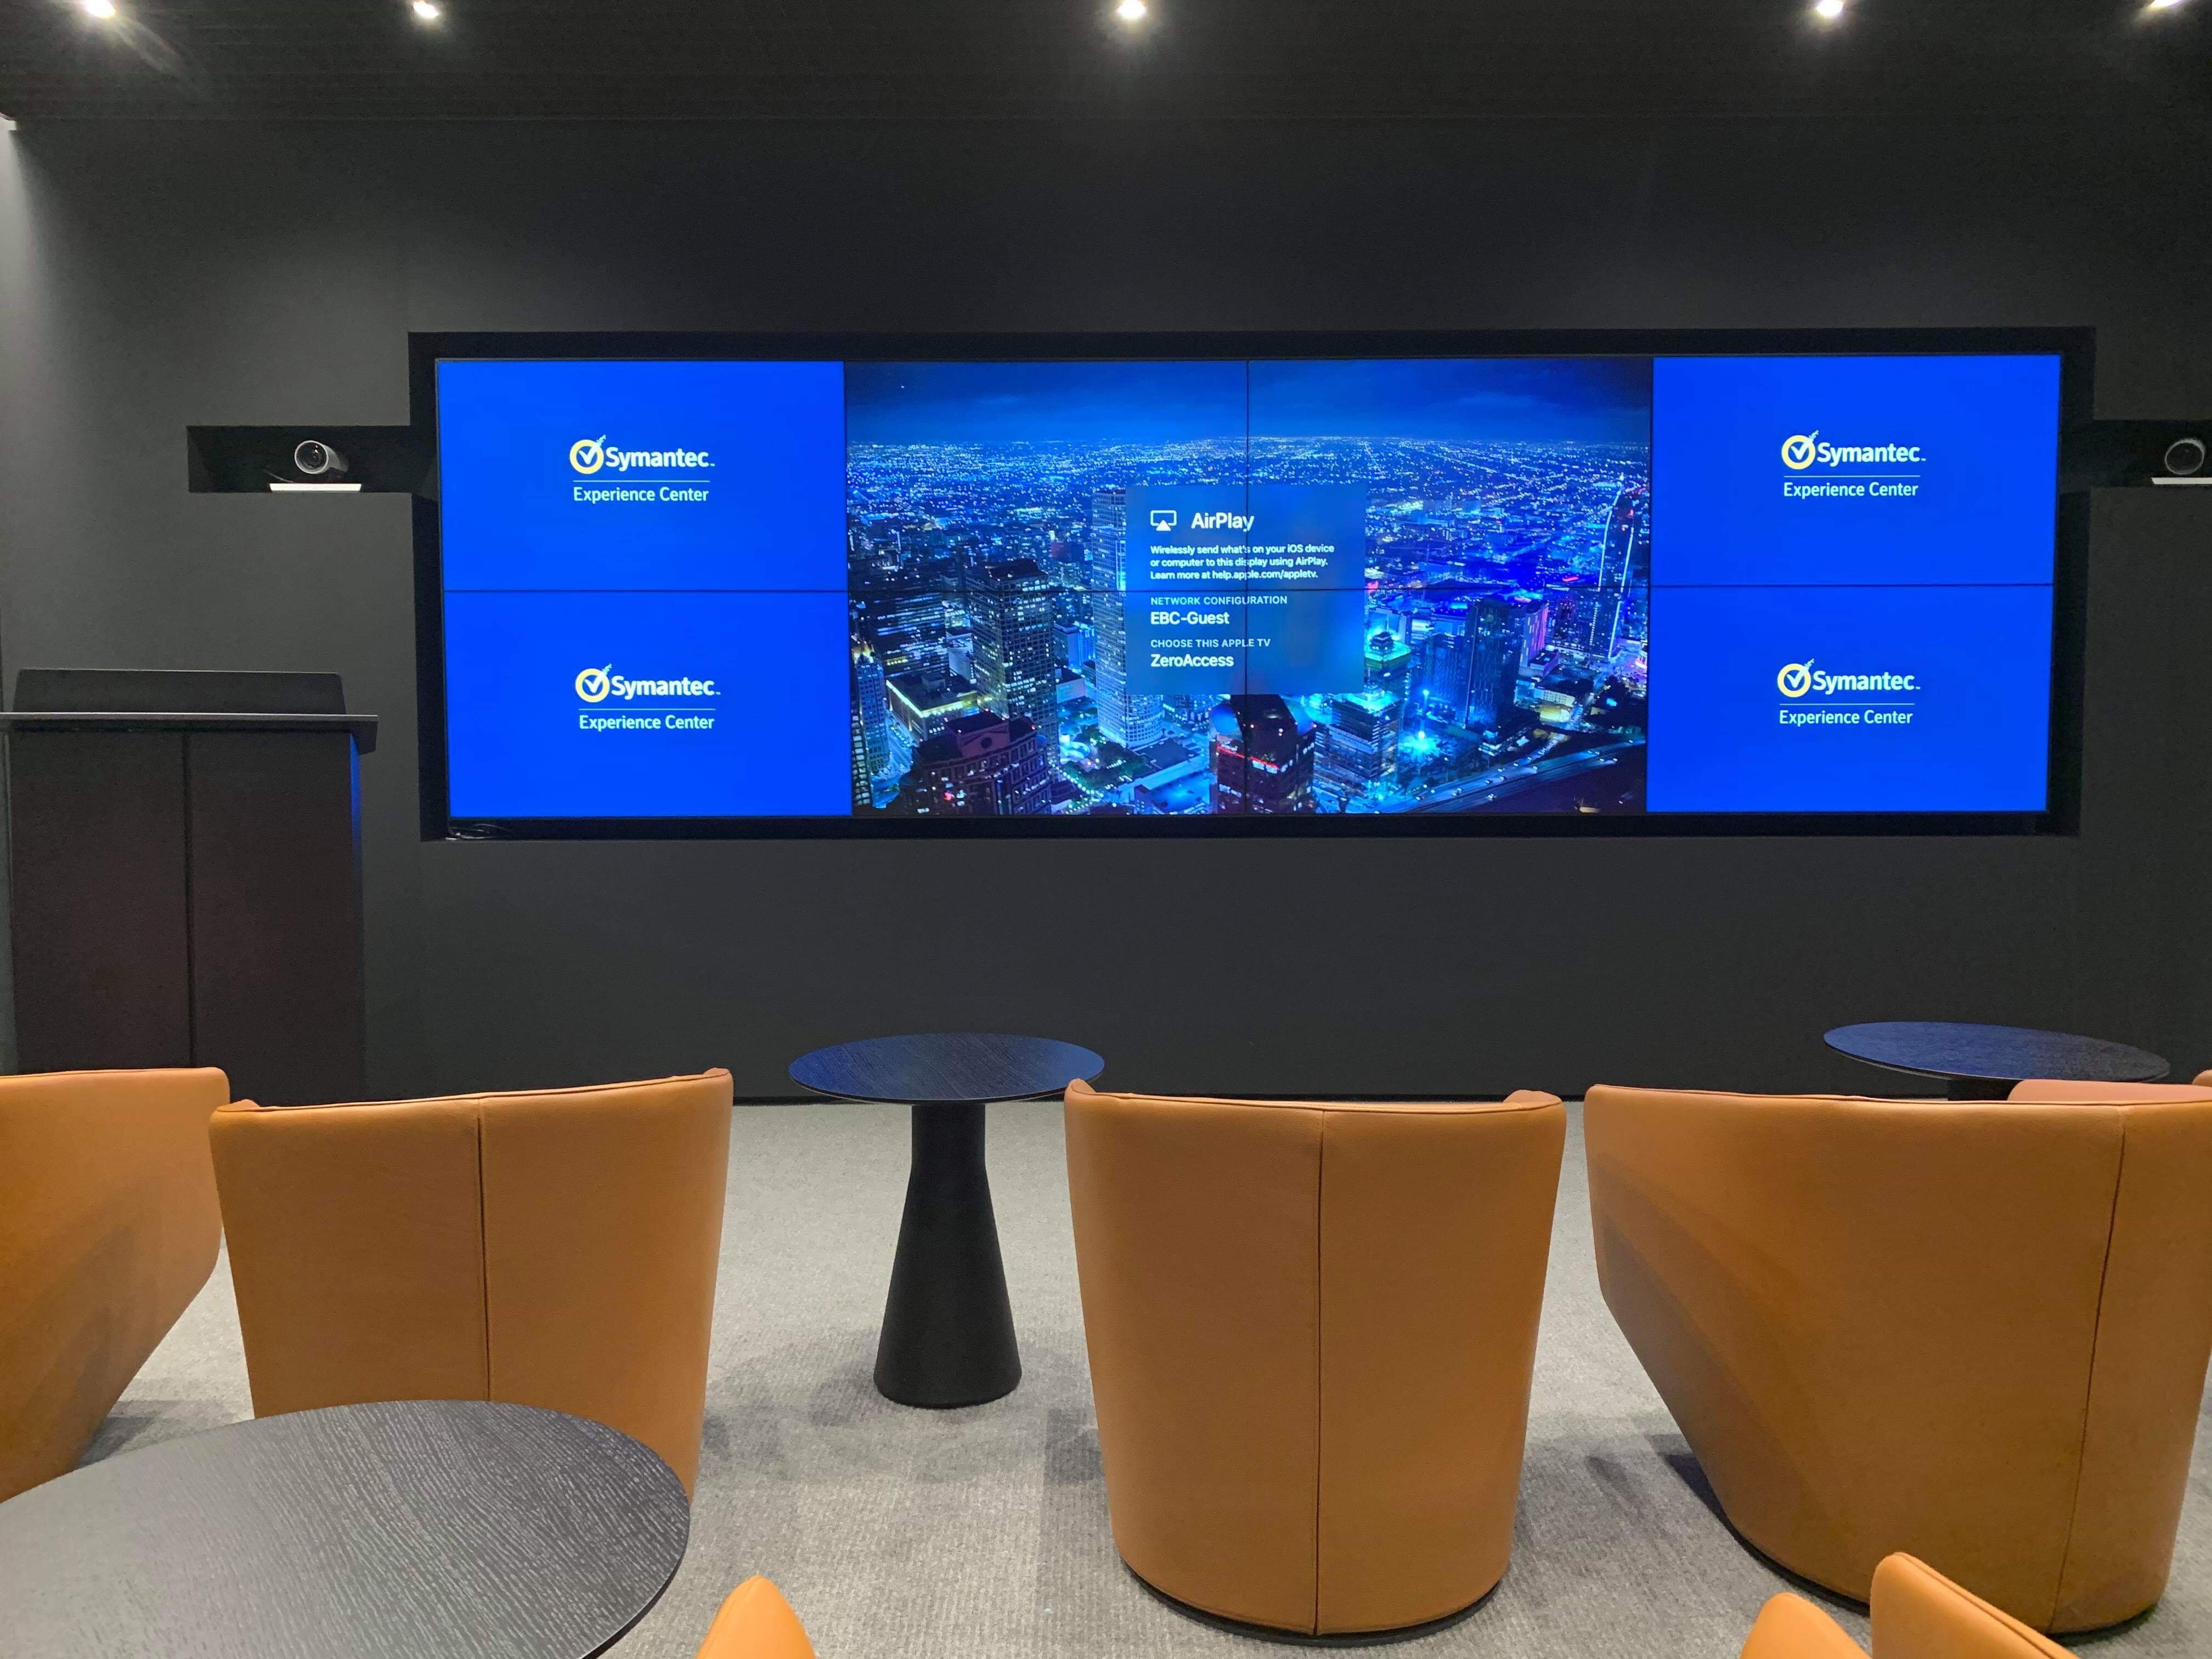 In spaces such as Demo Room 1, a 4x2 videowall driven by a Quantum Ultra 610 videowall processor displays selectable arrangements of source content in resolutions up to 4K/60 with 4:4:4 color sampling.